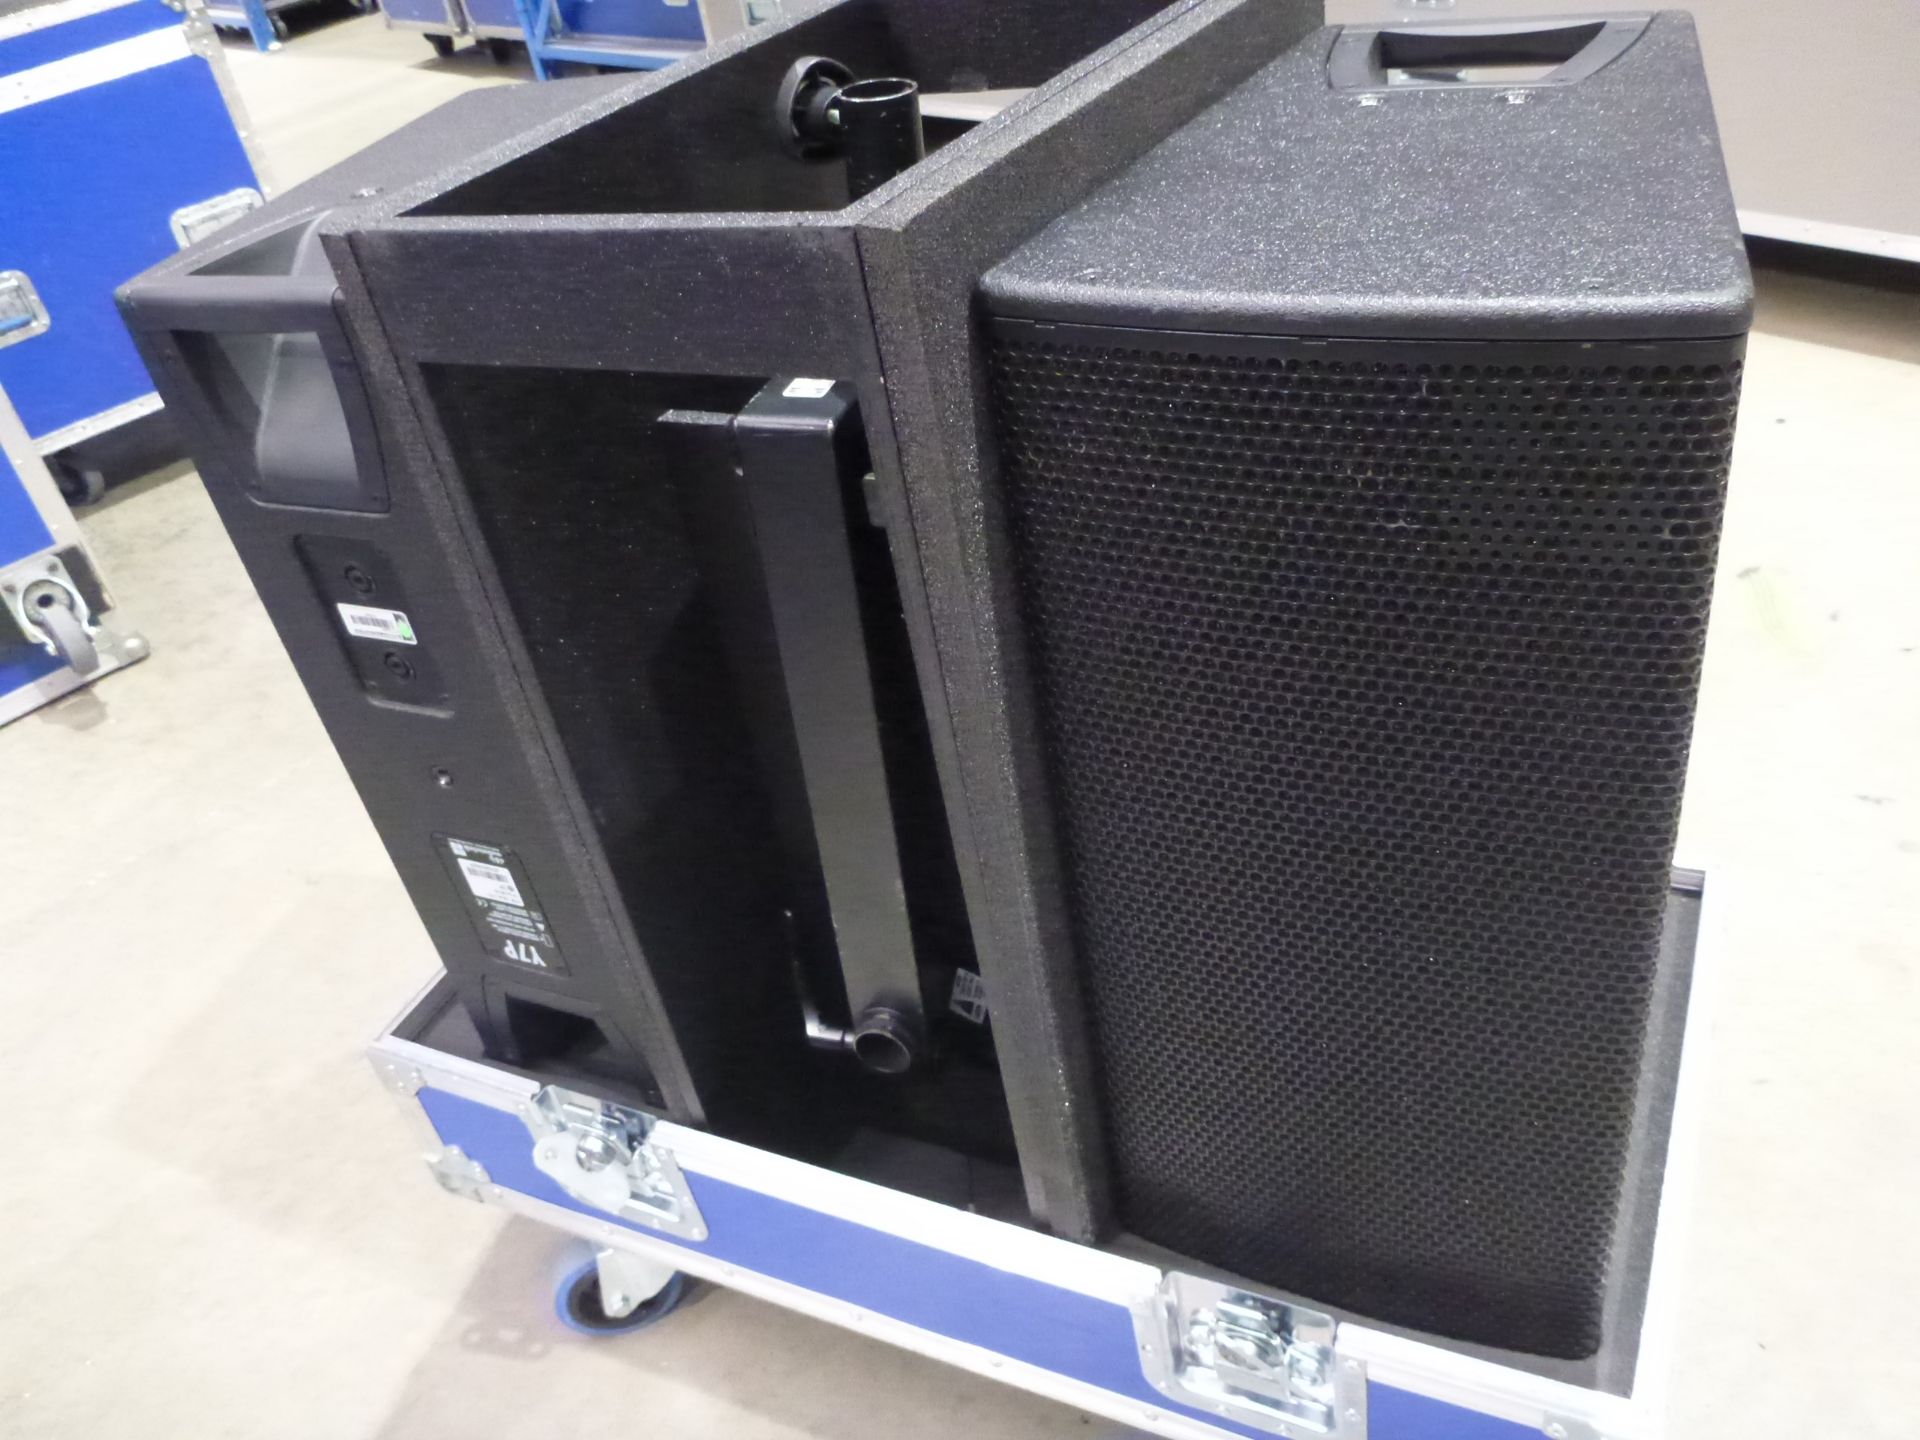 D & B Audiotecknik Y7P Loudspeakers (Pair) In flight case with flying frame, top hat and safety - Image 2 of 7